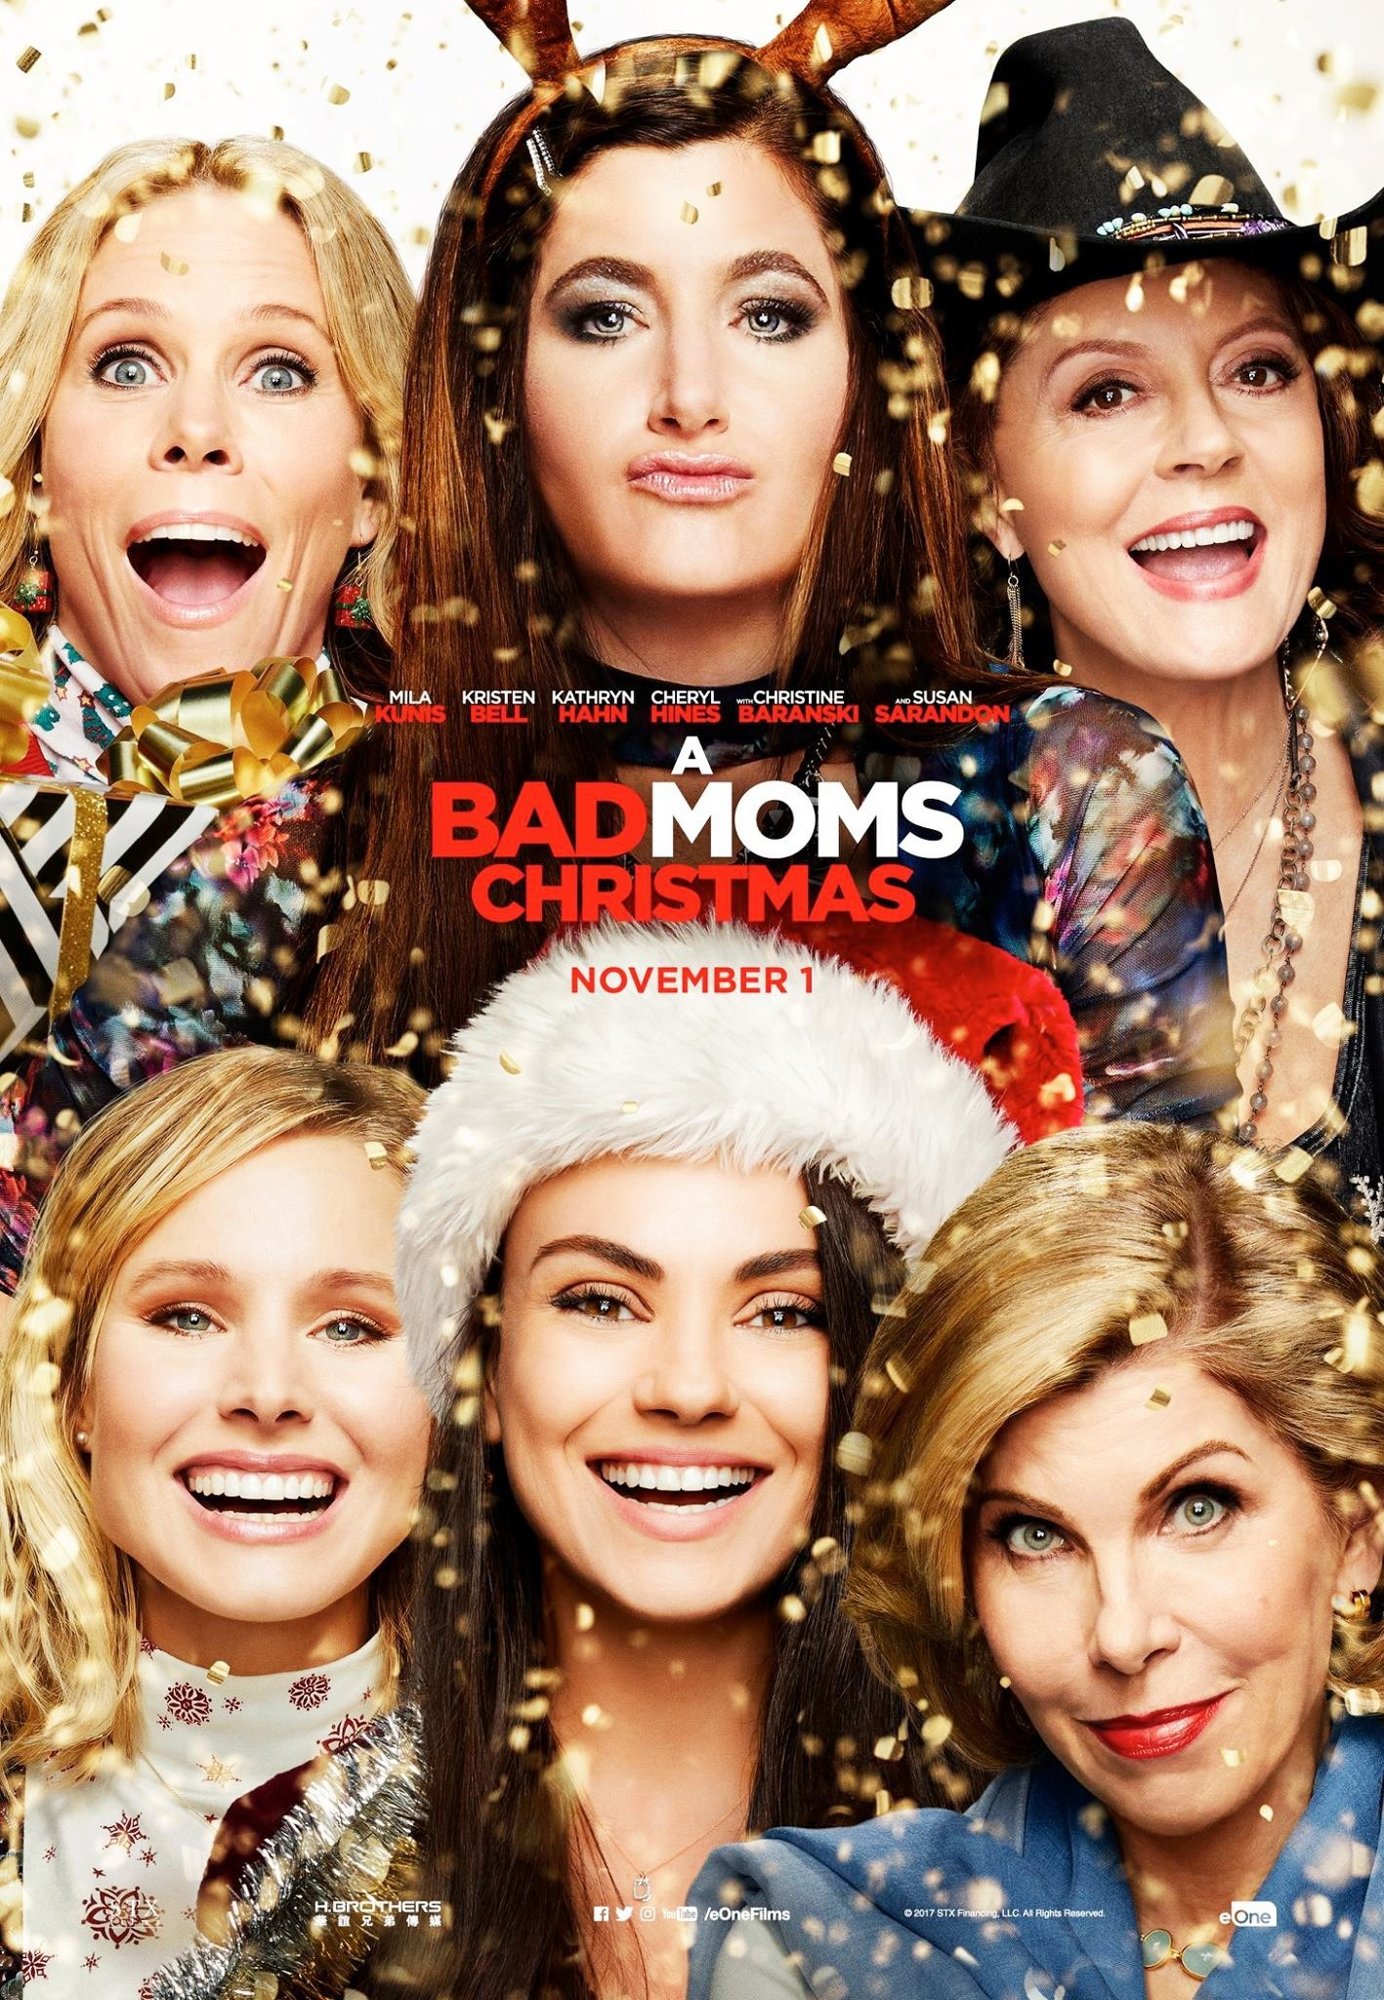 A Bad Moms Christmas Picture 8 